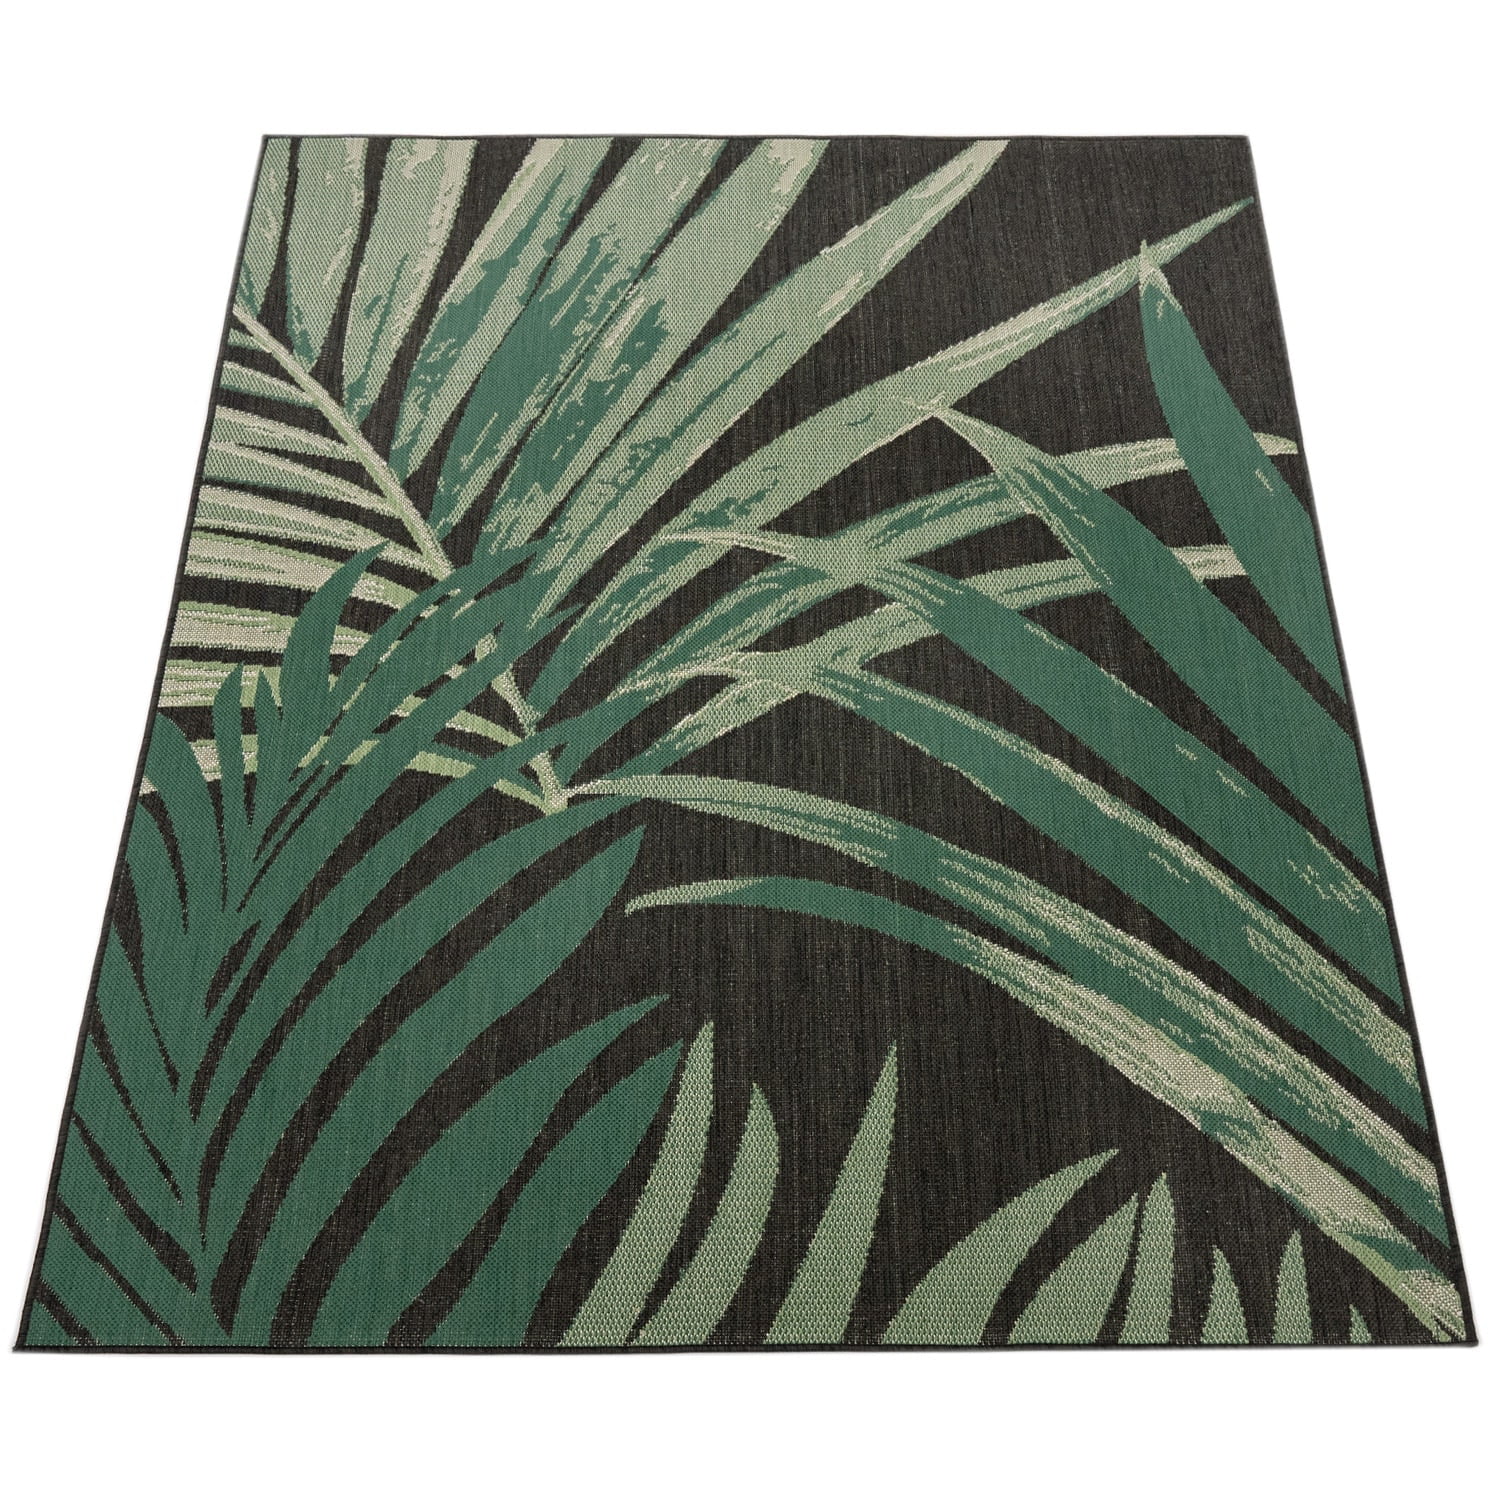 Paco Home Indoor & Outdoor Rug - Jungle Design with Green Palm Trees Green  4'7 x 6'7 4' x 6' Runner, Outdoor, Indoor Living Room, Patio Rectangle 